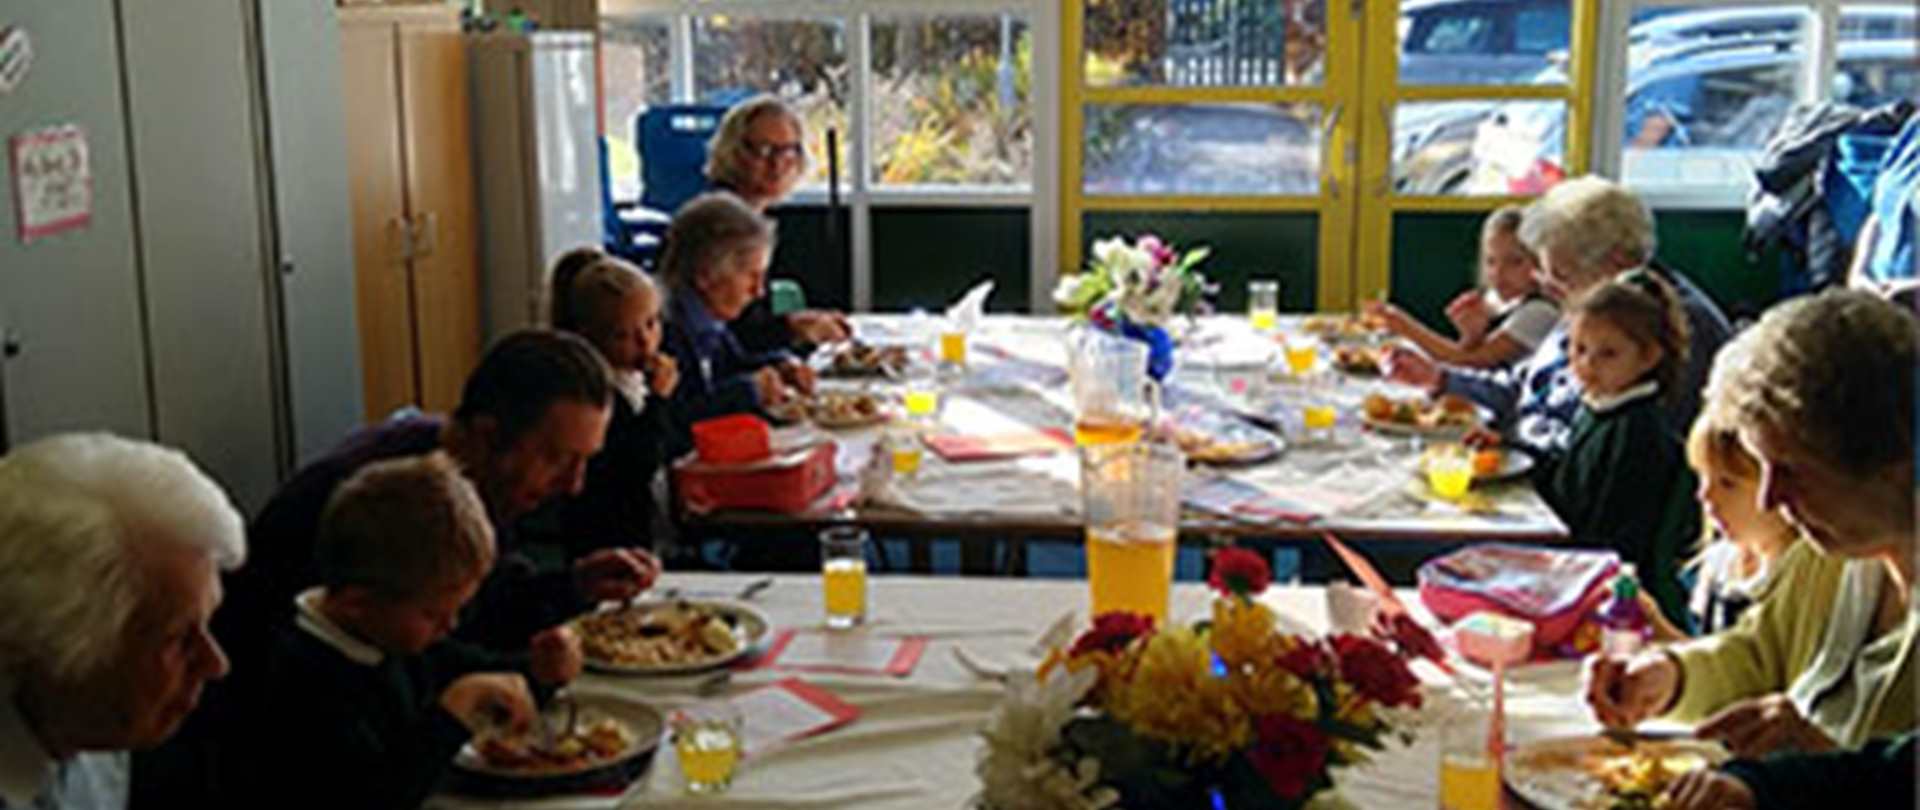 A group of children and adults enjoying a meal together at a community cafe